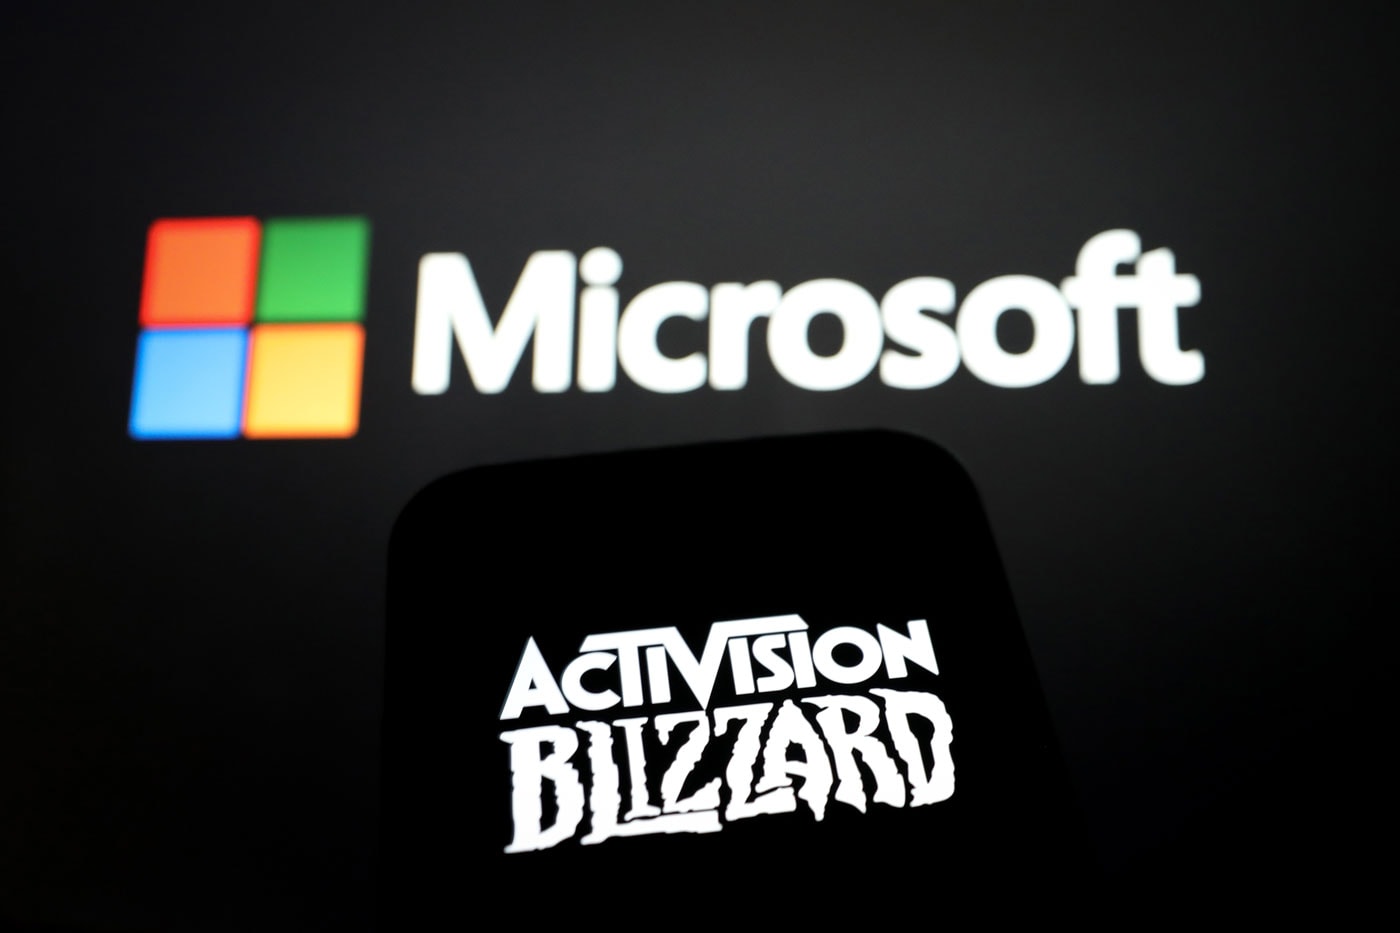 Activision Blizzard Shareholders Approve Microsoft's Takeover Bid 98 percent of votes approved 69 billion USD merger antitrust news info